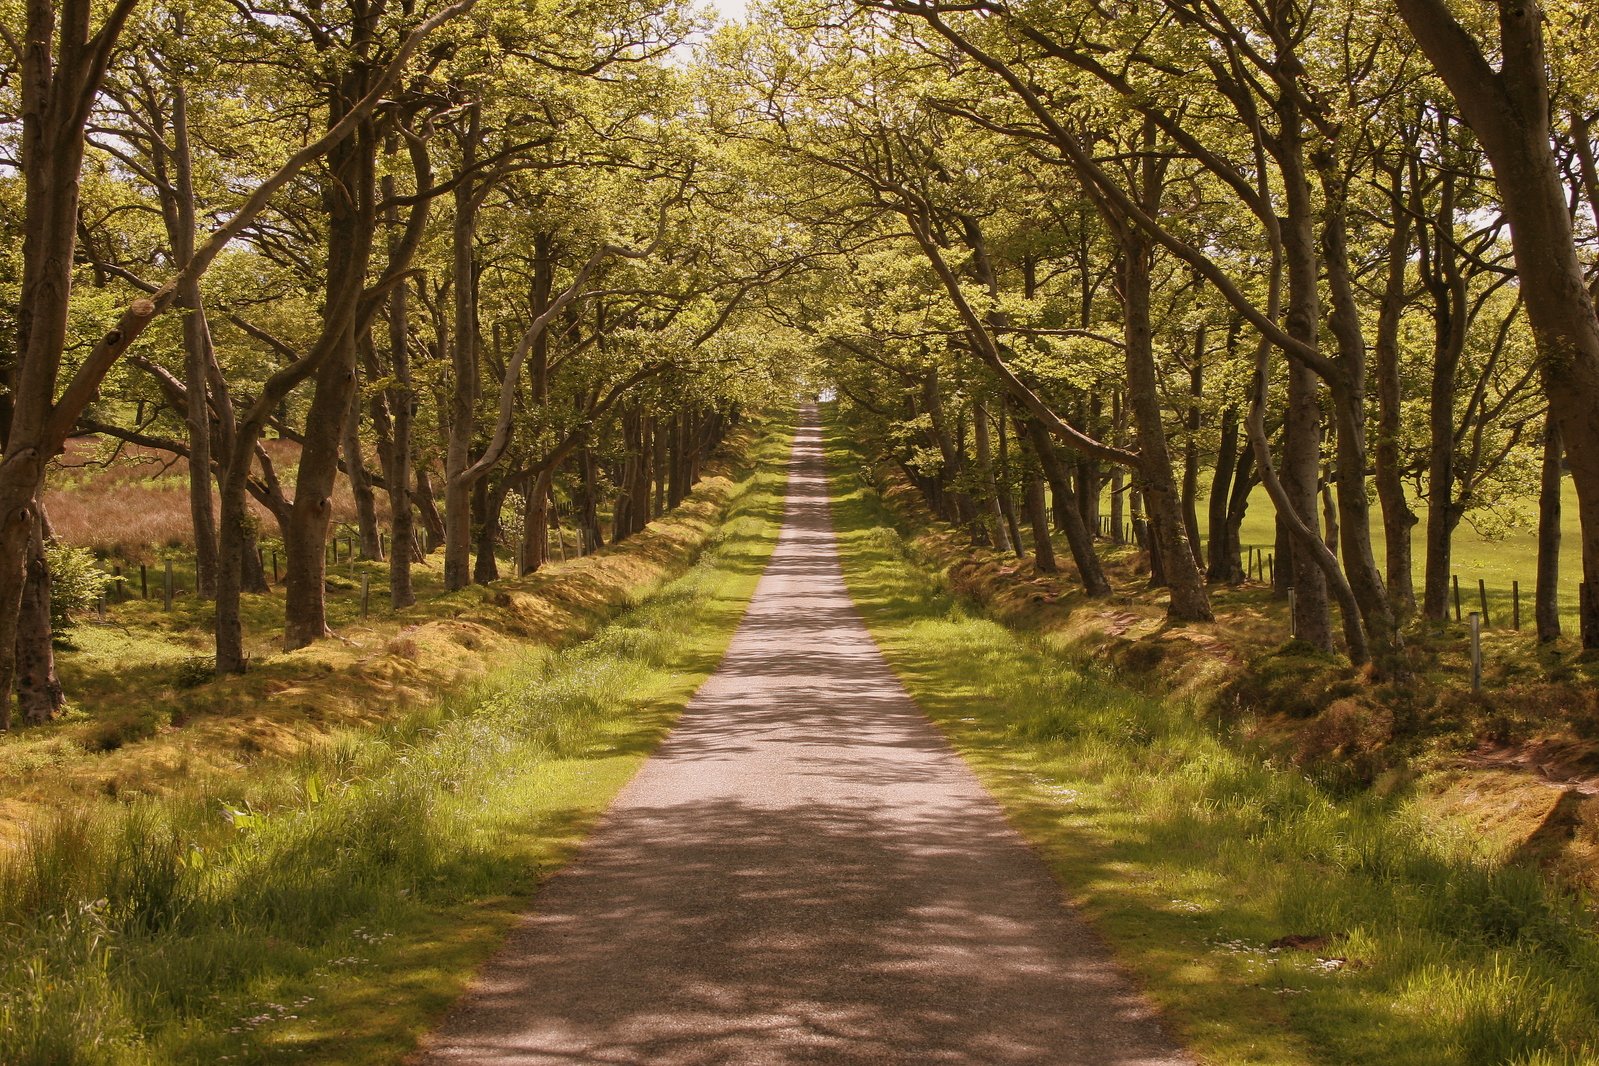 the road is next to the trees in the country